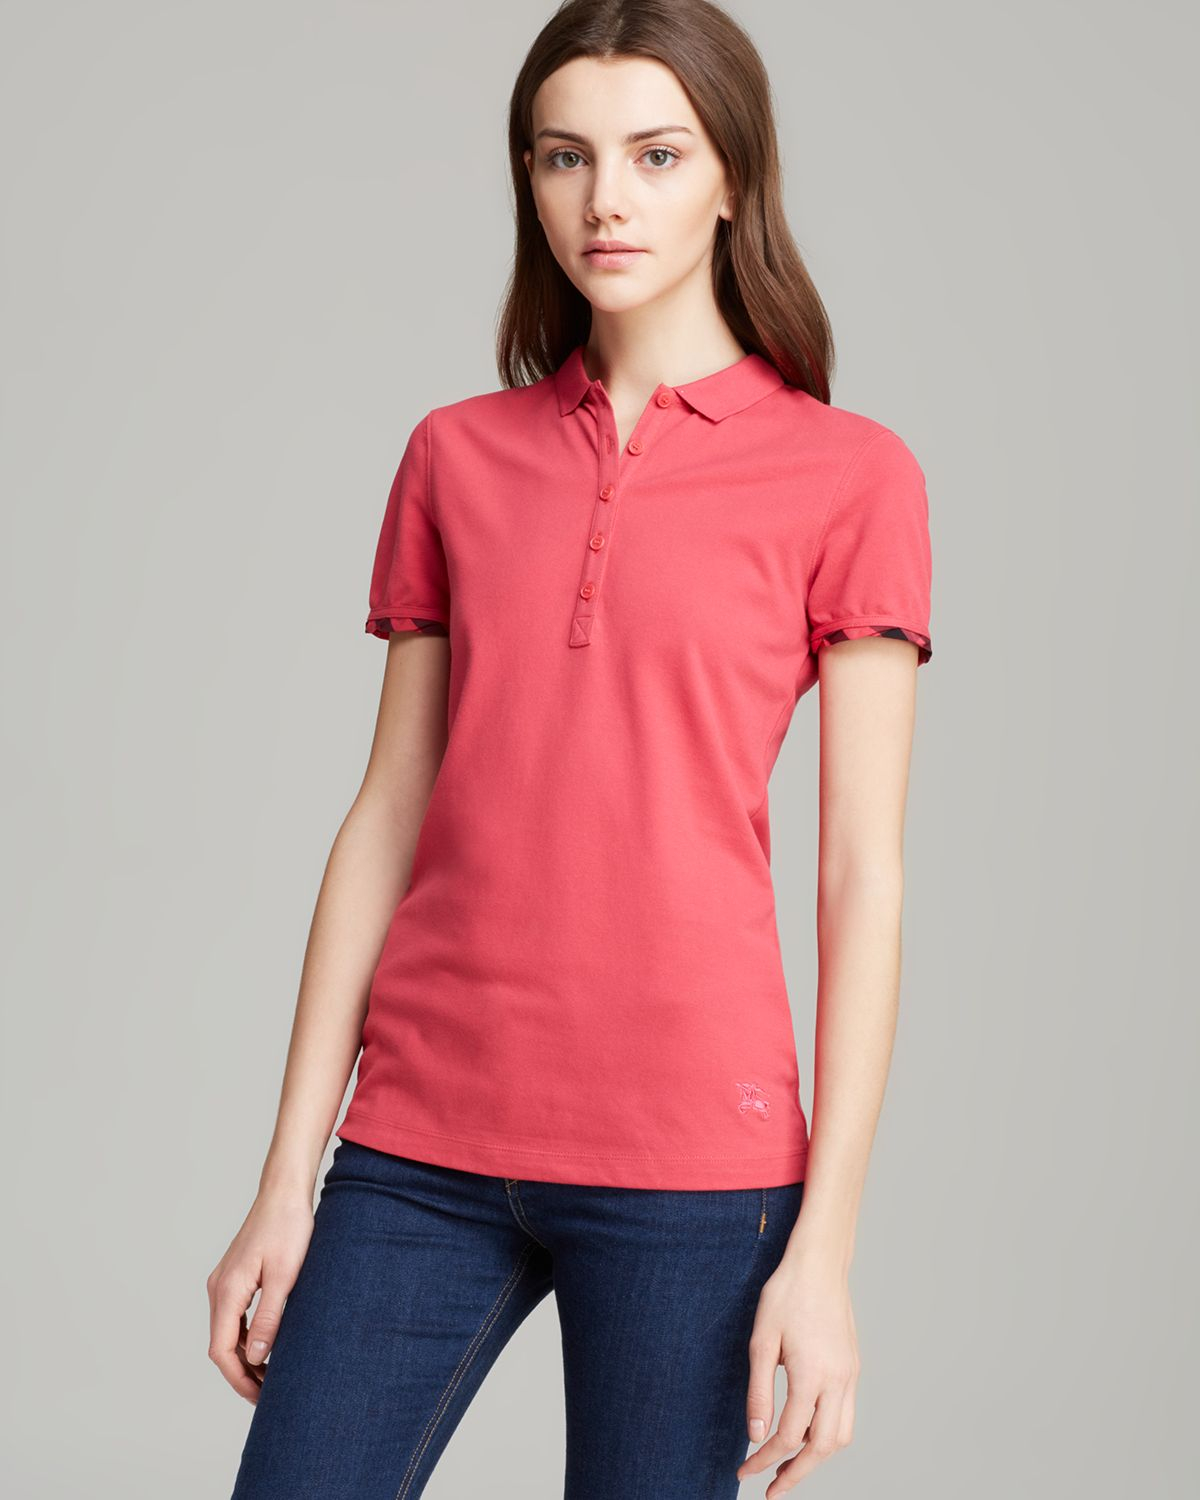 Burberry Brit Check Cuff Polo Shirt in Pink | Lyst